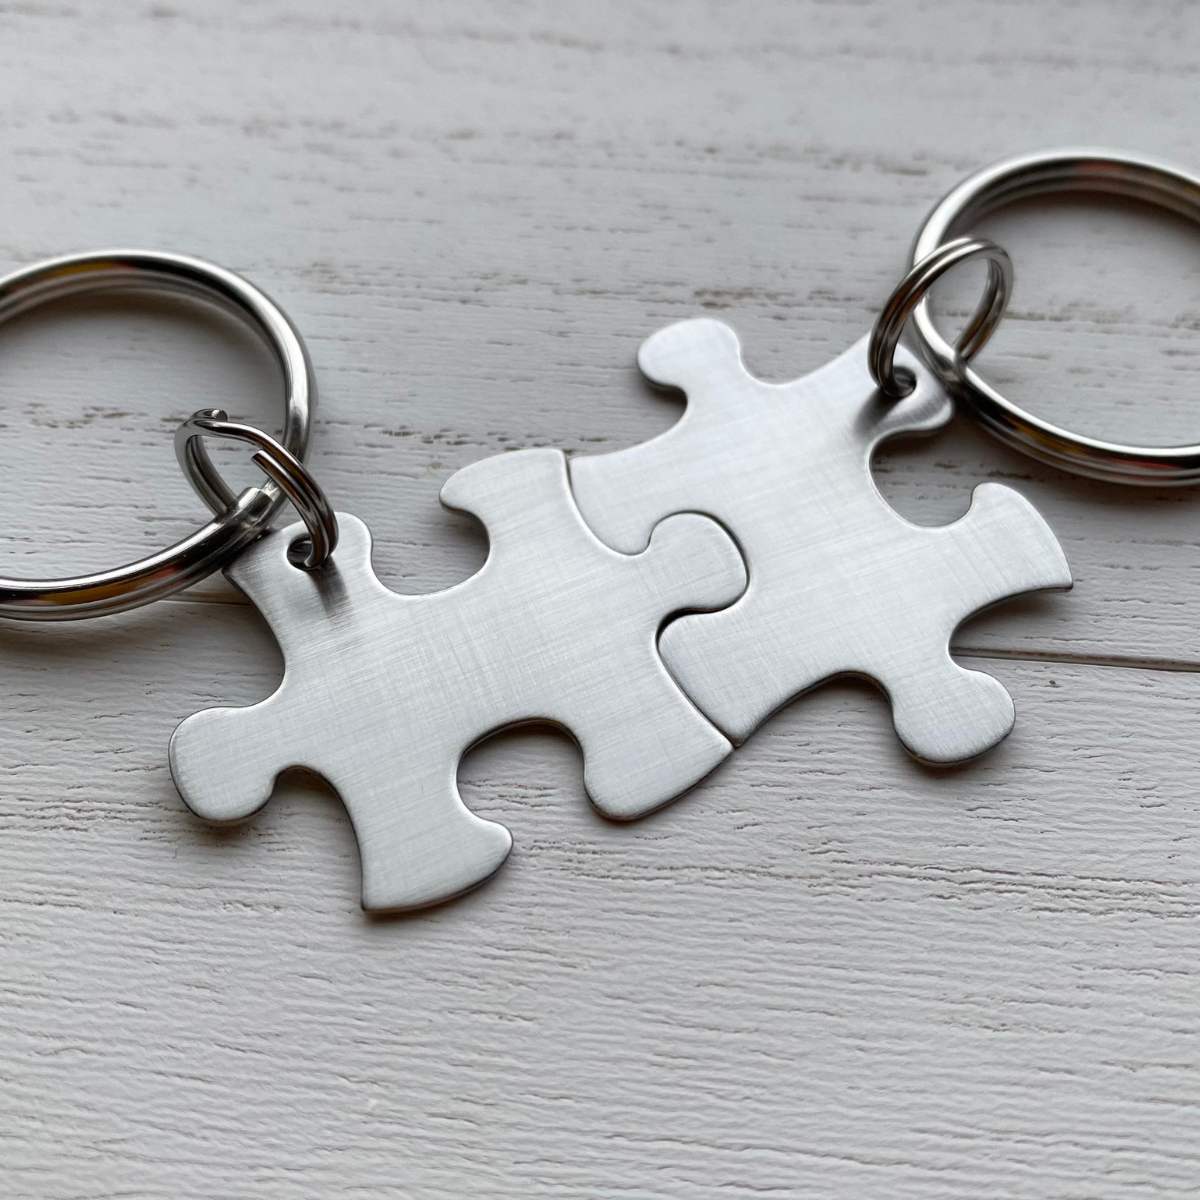 40. Unlock Your Love with Customized Puzzle Piece Keychains: The Perfect Anniversary Gifts For Long Distance Couples